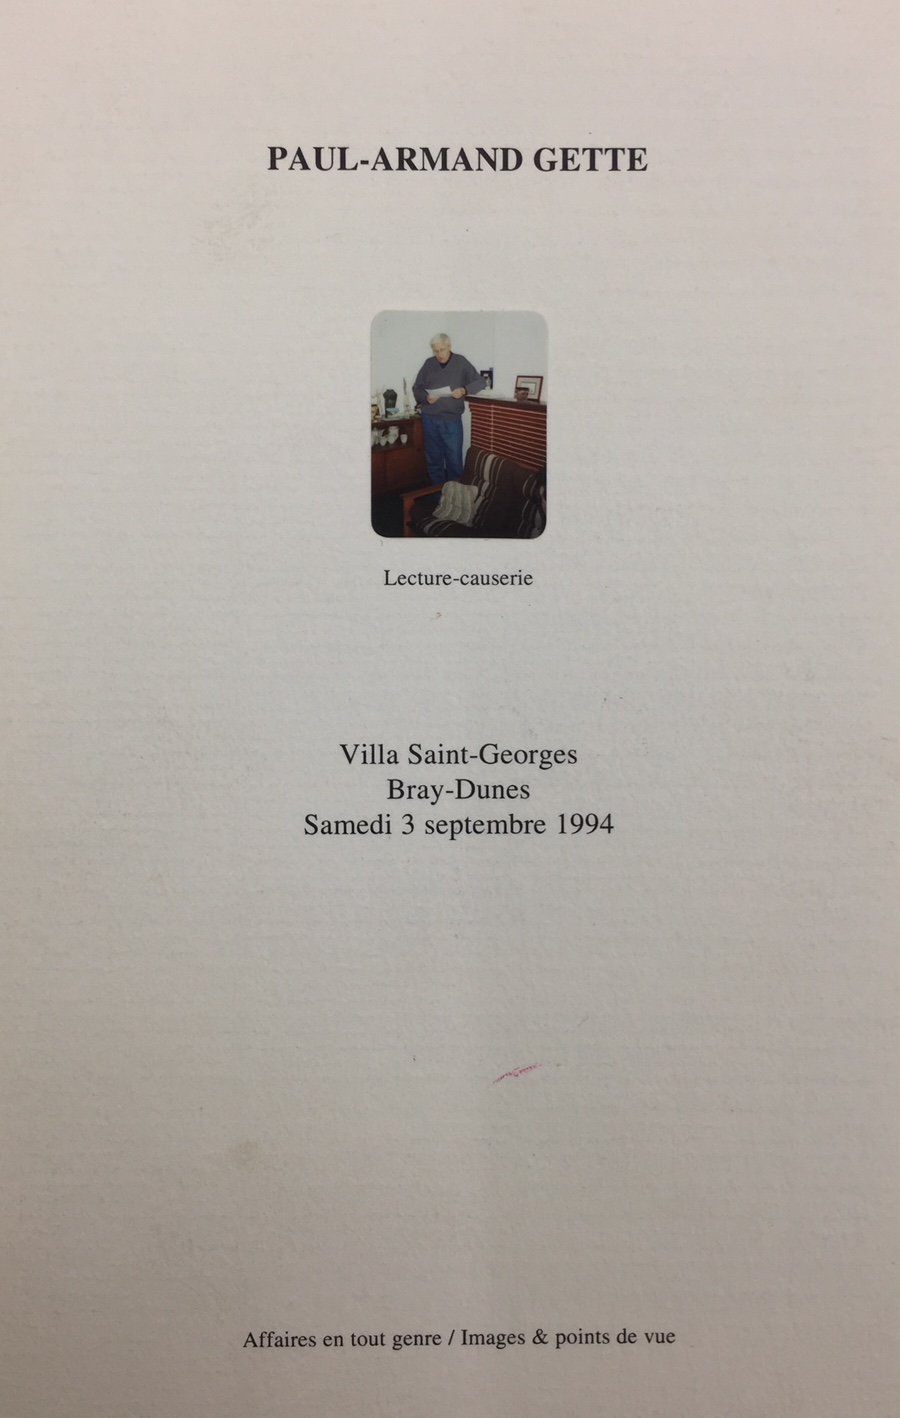 Lecture-causerie